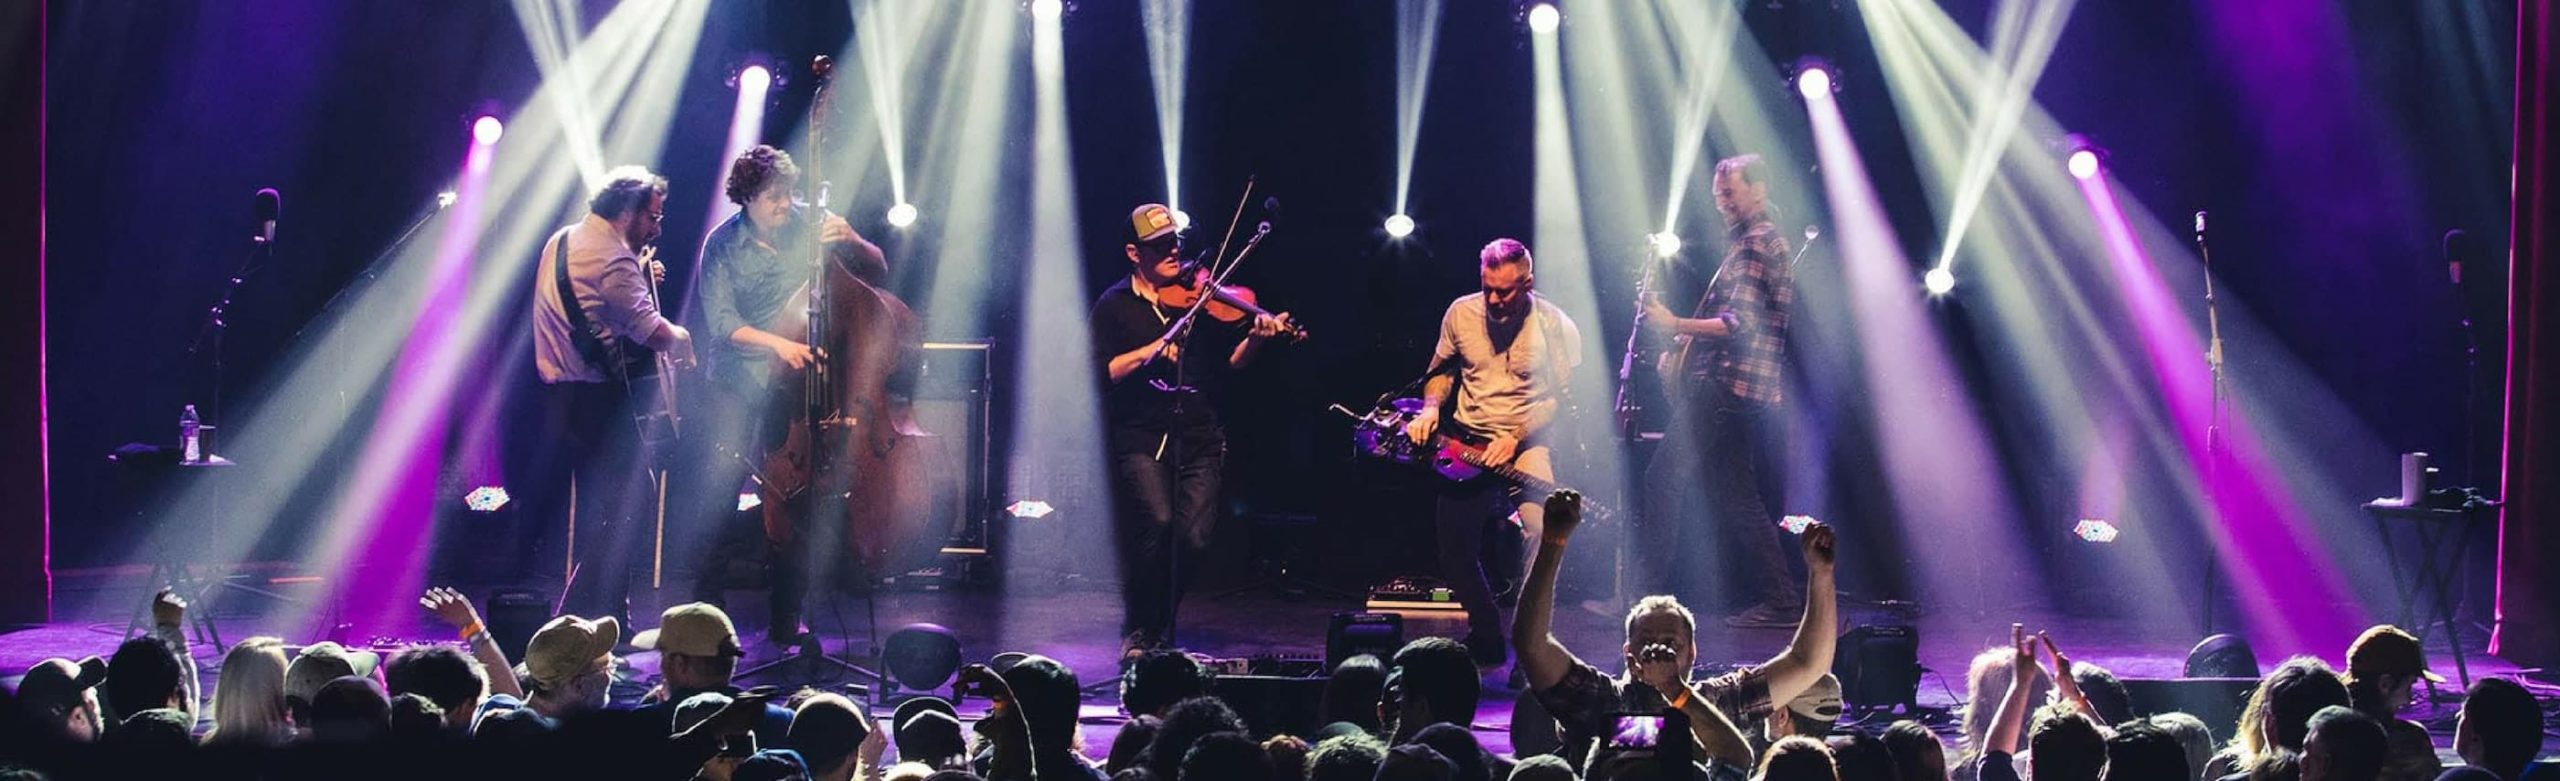 Masters of Bluegrass The Infamous Stringdusters Confirm Shows in Missoula & Bozeman Image